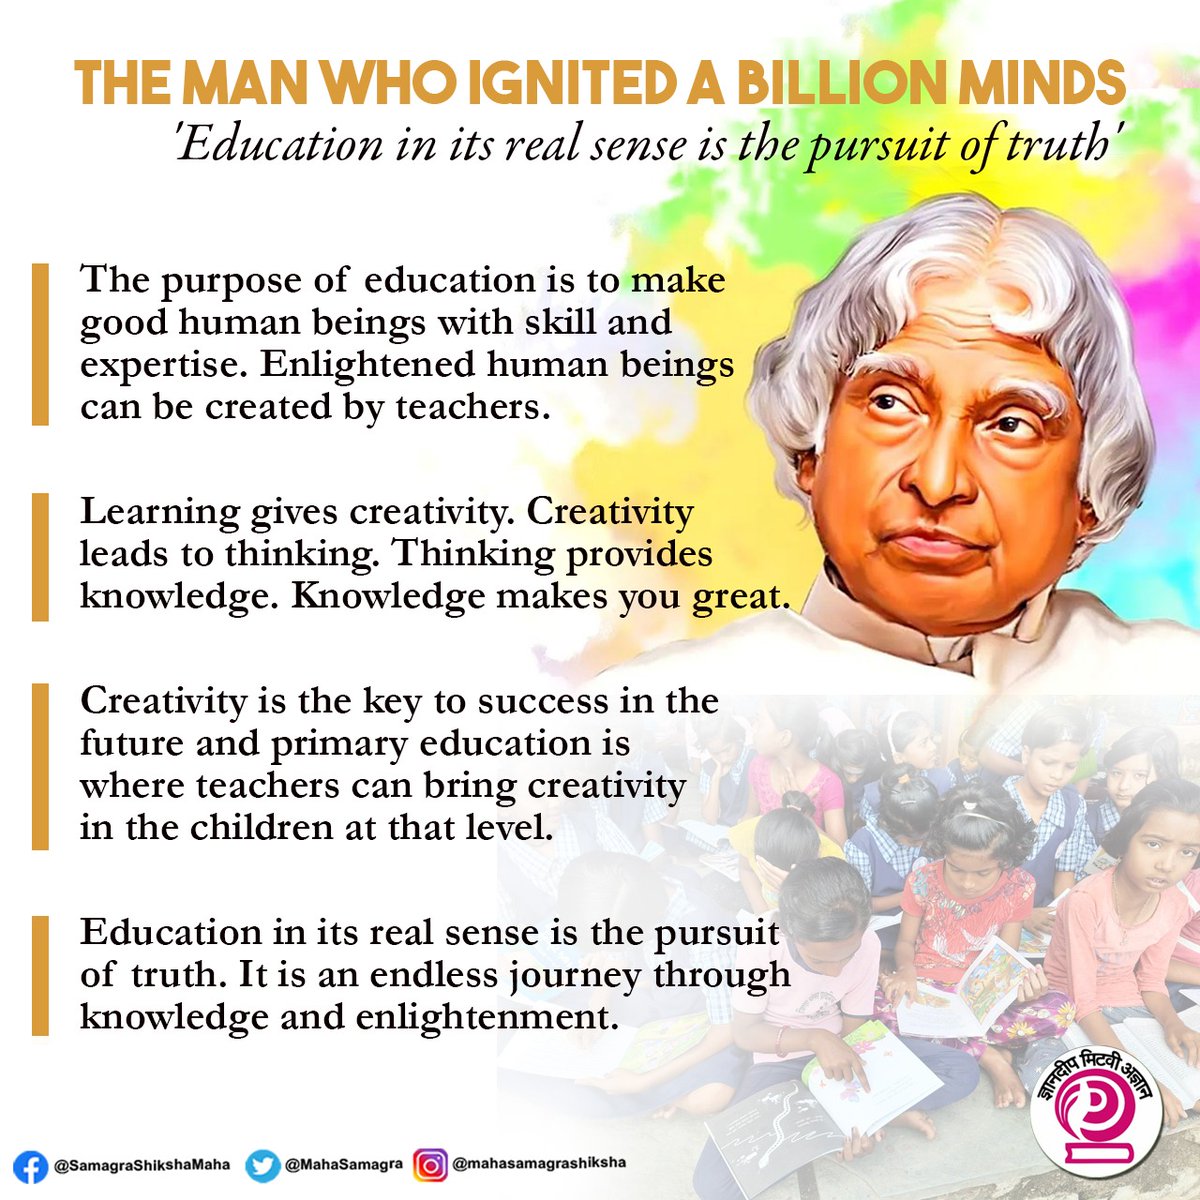 Former #PresidentofIndia, #BharatRatna Dr. #APJAbdulKalam, who was a prolific writer & lifelong teacher, believed in spreading the #JoyofReading among children. On his birth anniversary,celebrated as #VachanPreranaDin,let us take inspiration from him & pledge to read & know more.